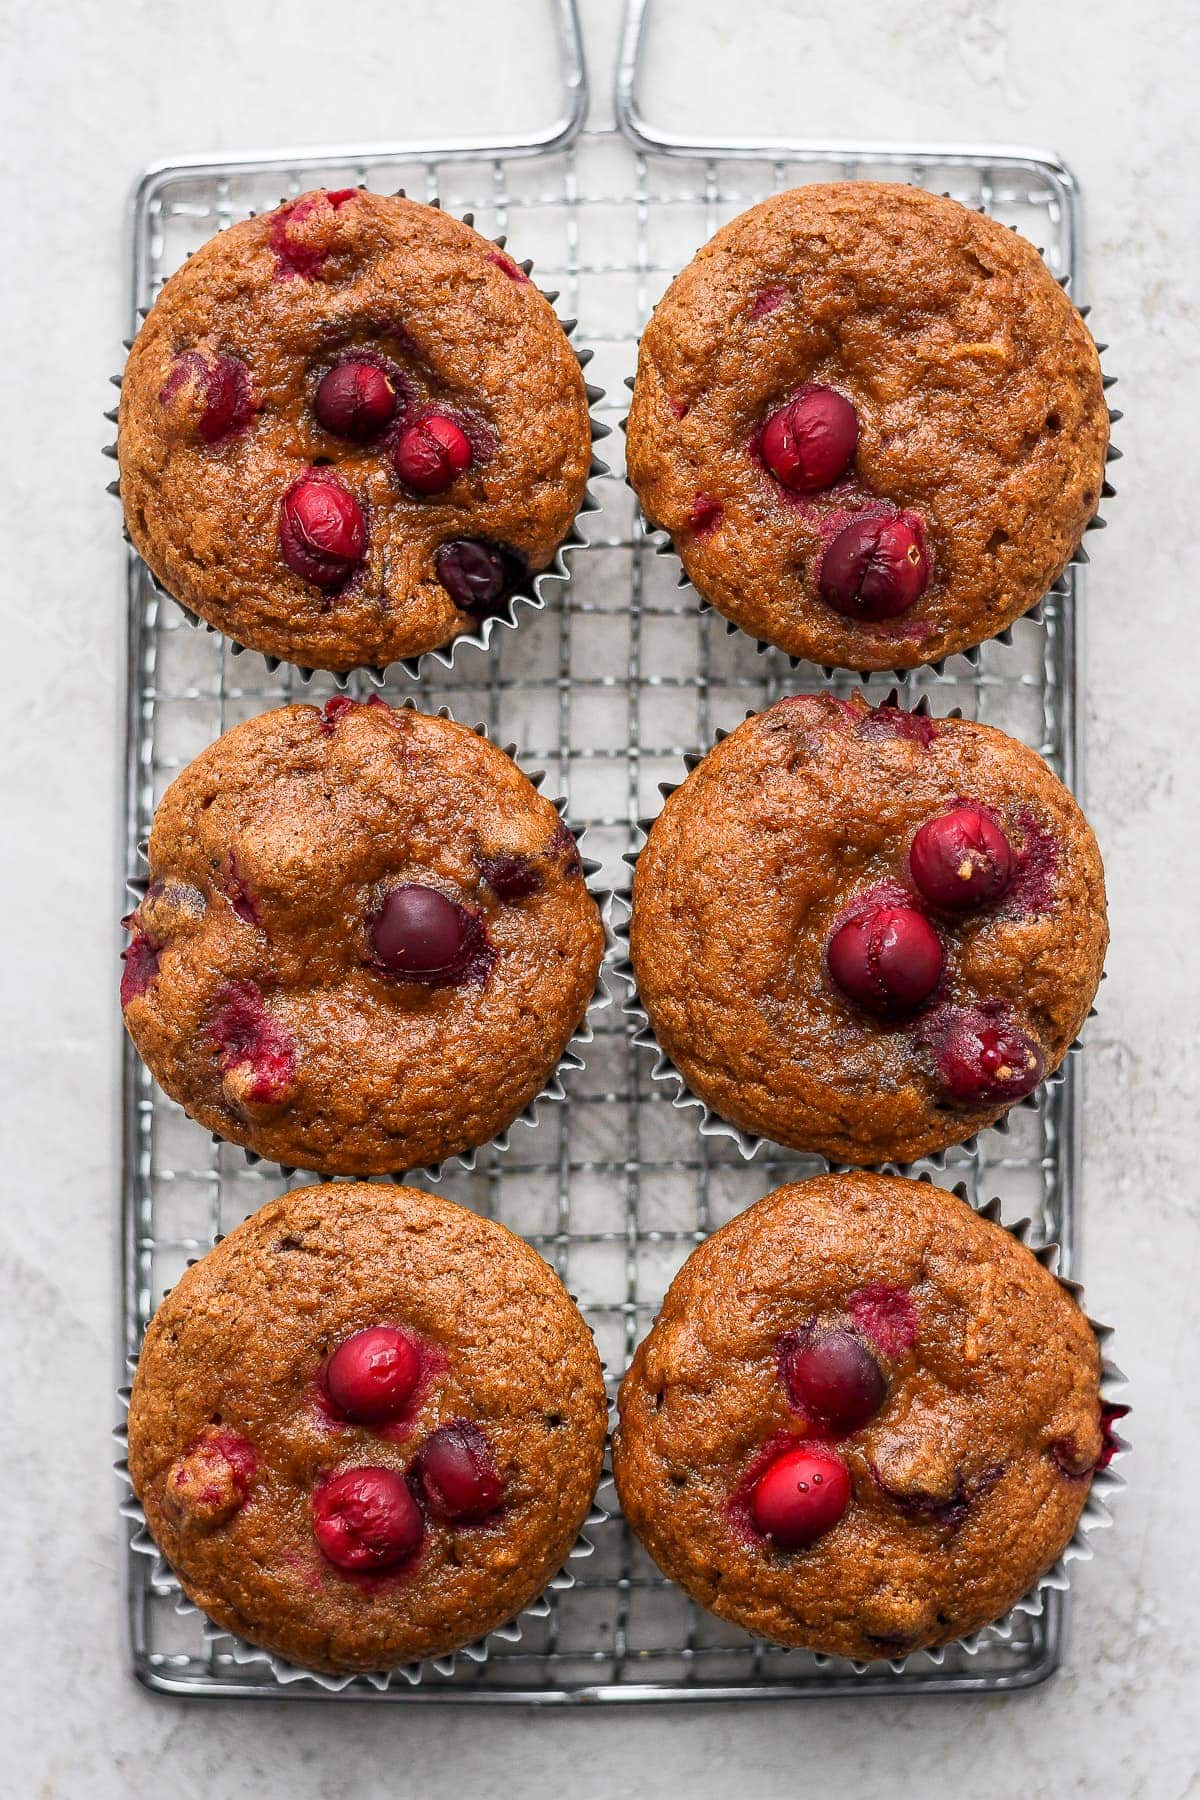 6 Healthy Muffin Recipes (1 Base Muffin Recipe) - Fit Foodie Finds